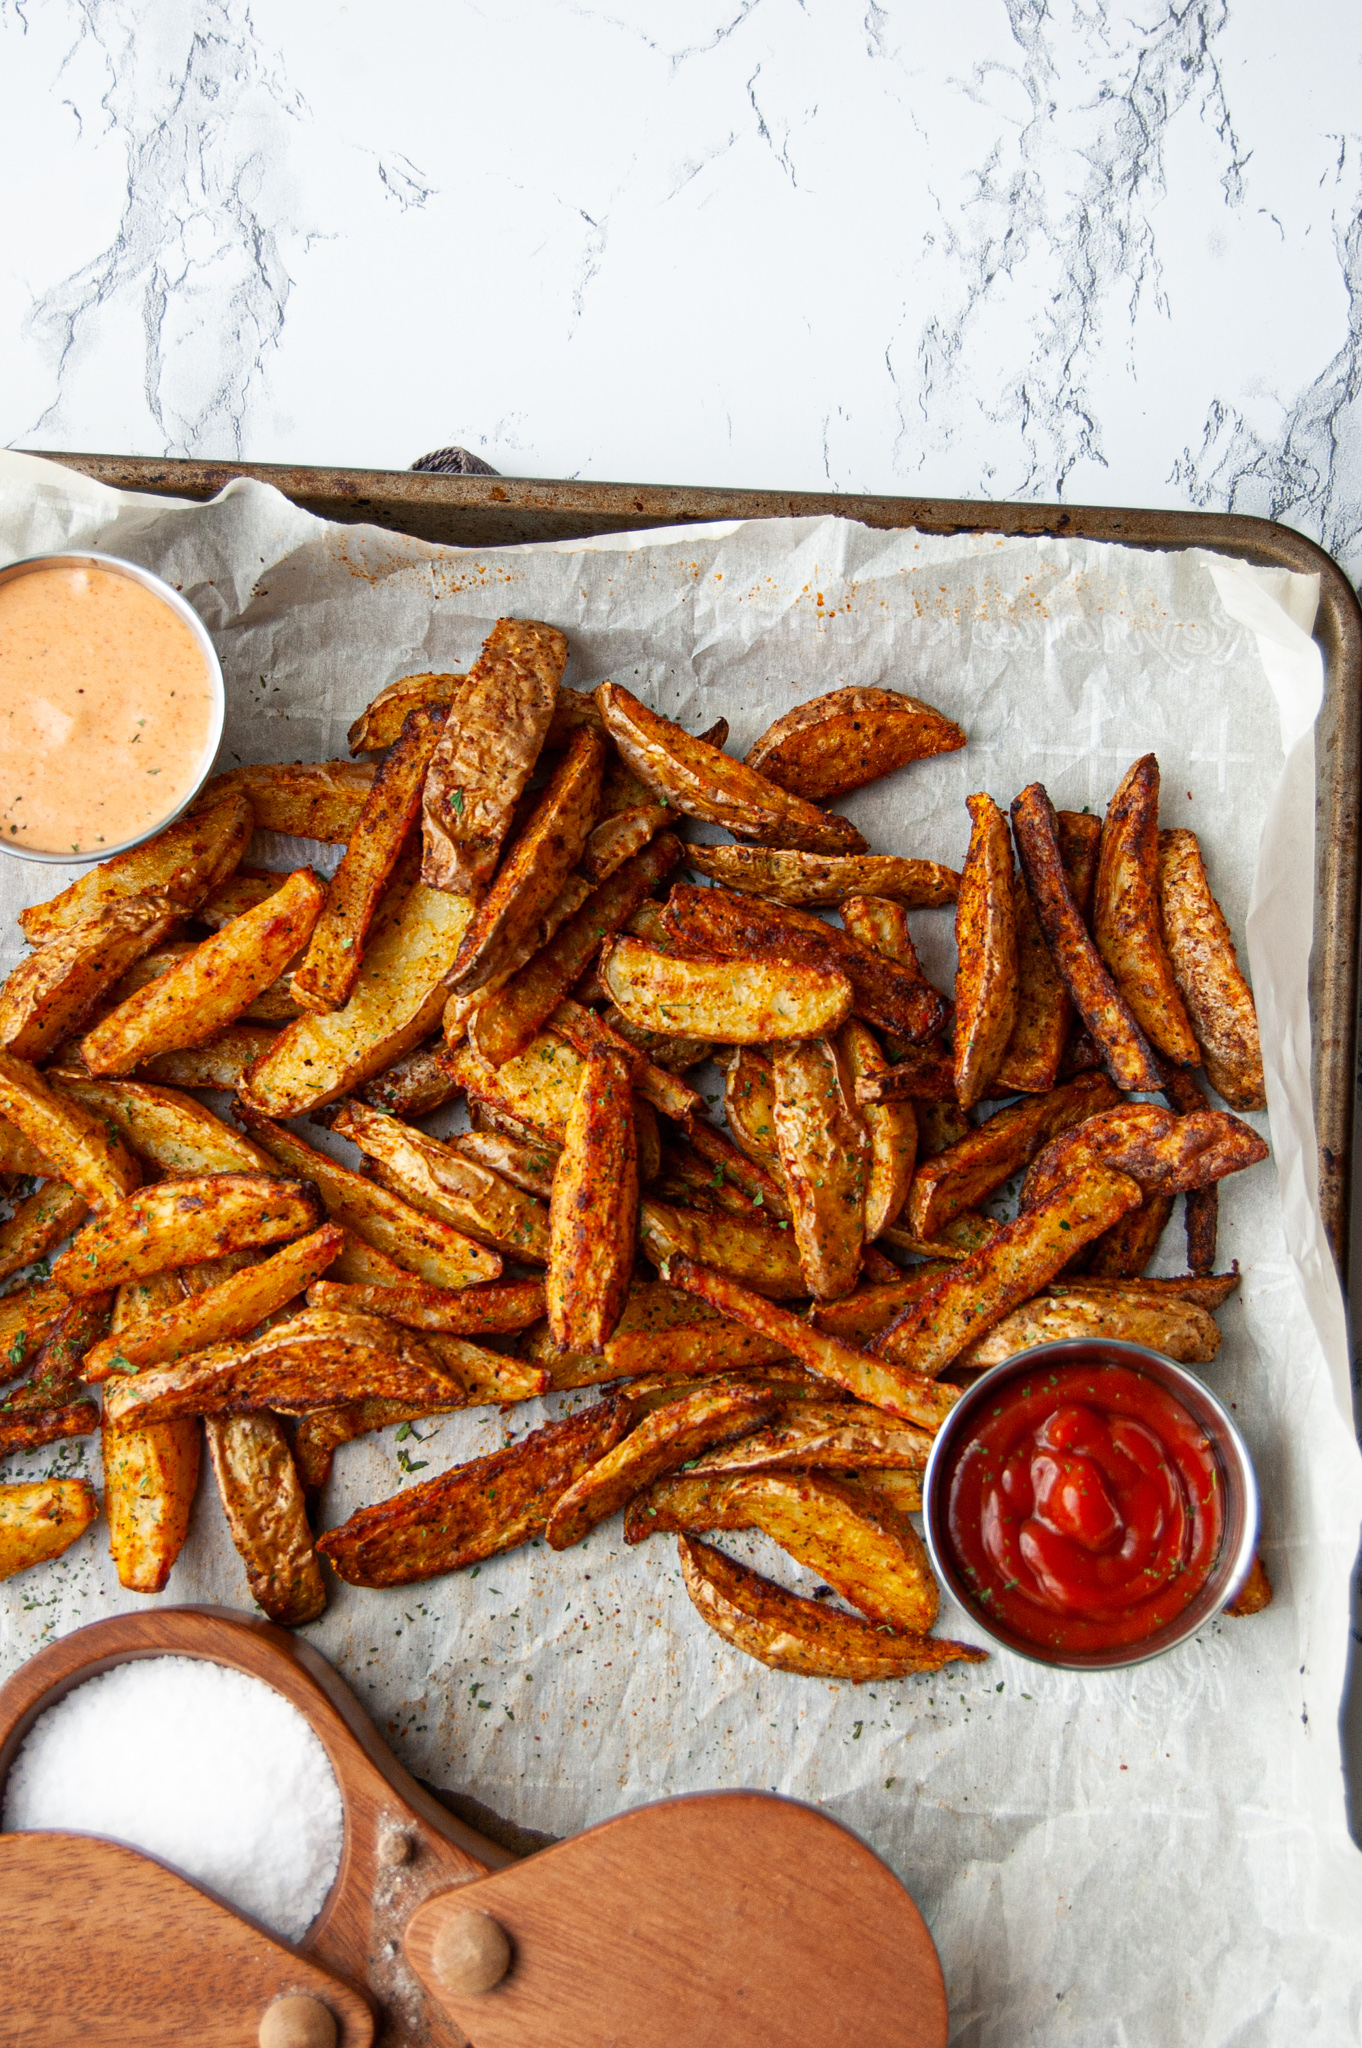 These Easy Seasoned French Fries can be made in either the oven or air fryer for a flavorful and crispy side. Perfect with your favorite dipping sauce!